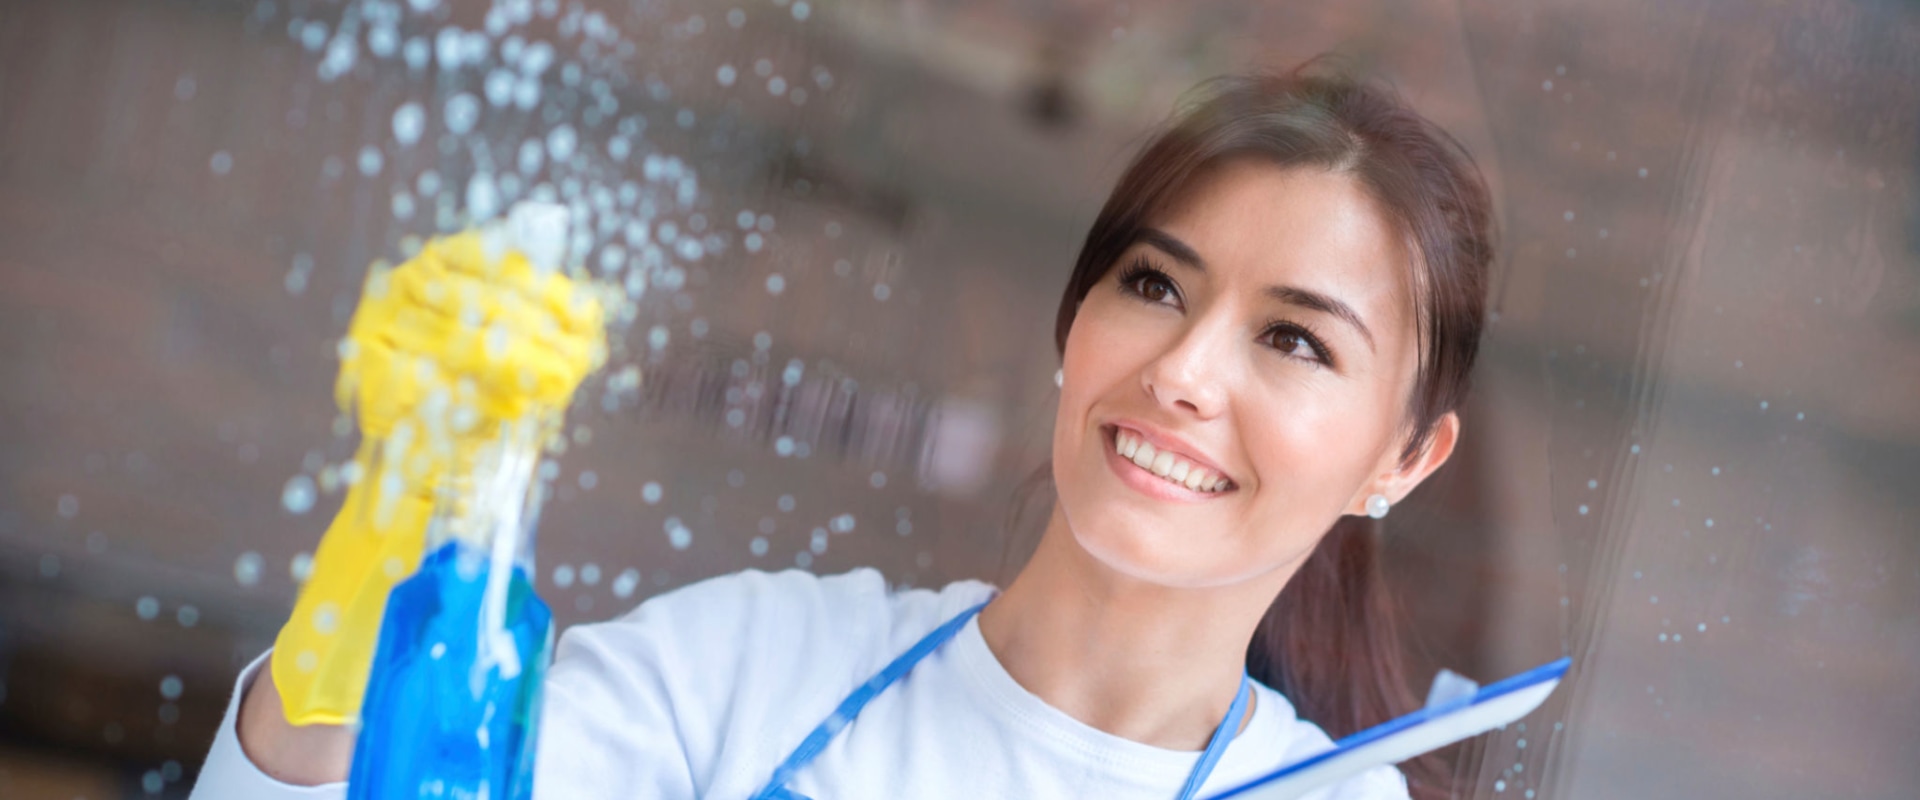 How Long Does a Typical Maid Service Take in Houston?